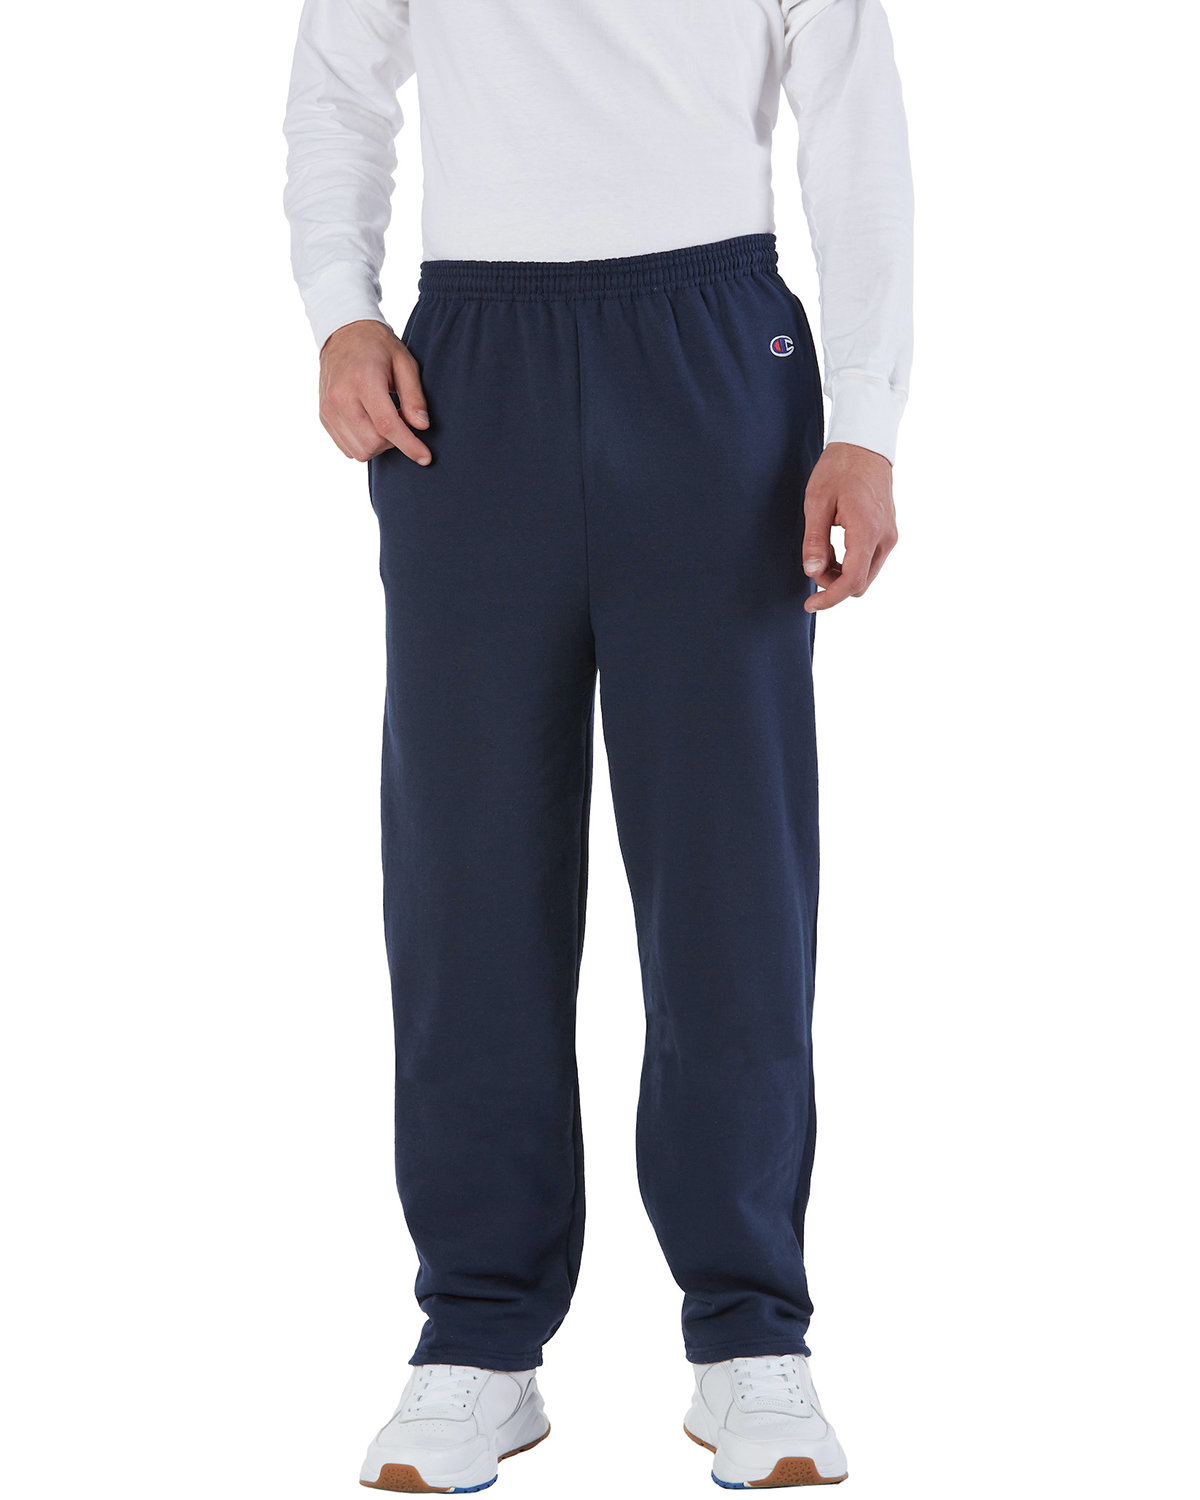 Champion Adult Powerblend® Open-Bottom Fleece Pant with Pockets NAVY 